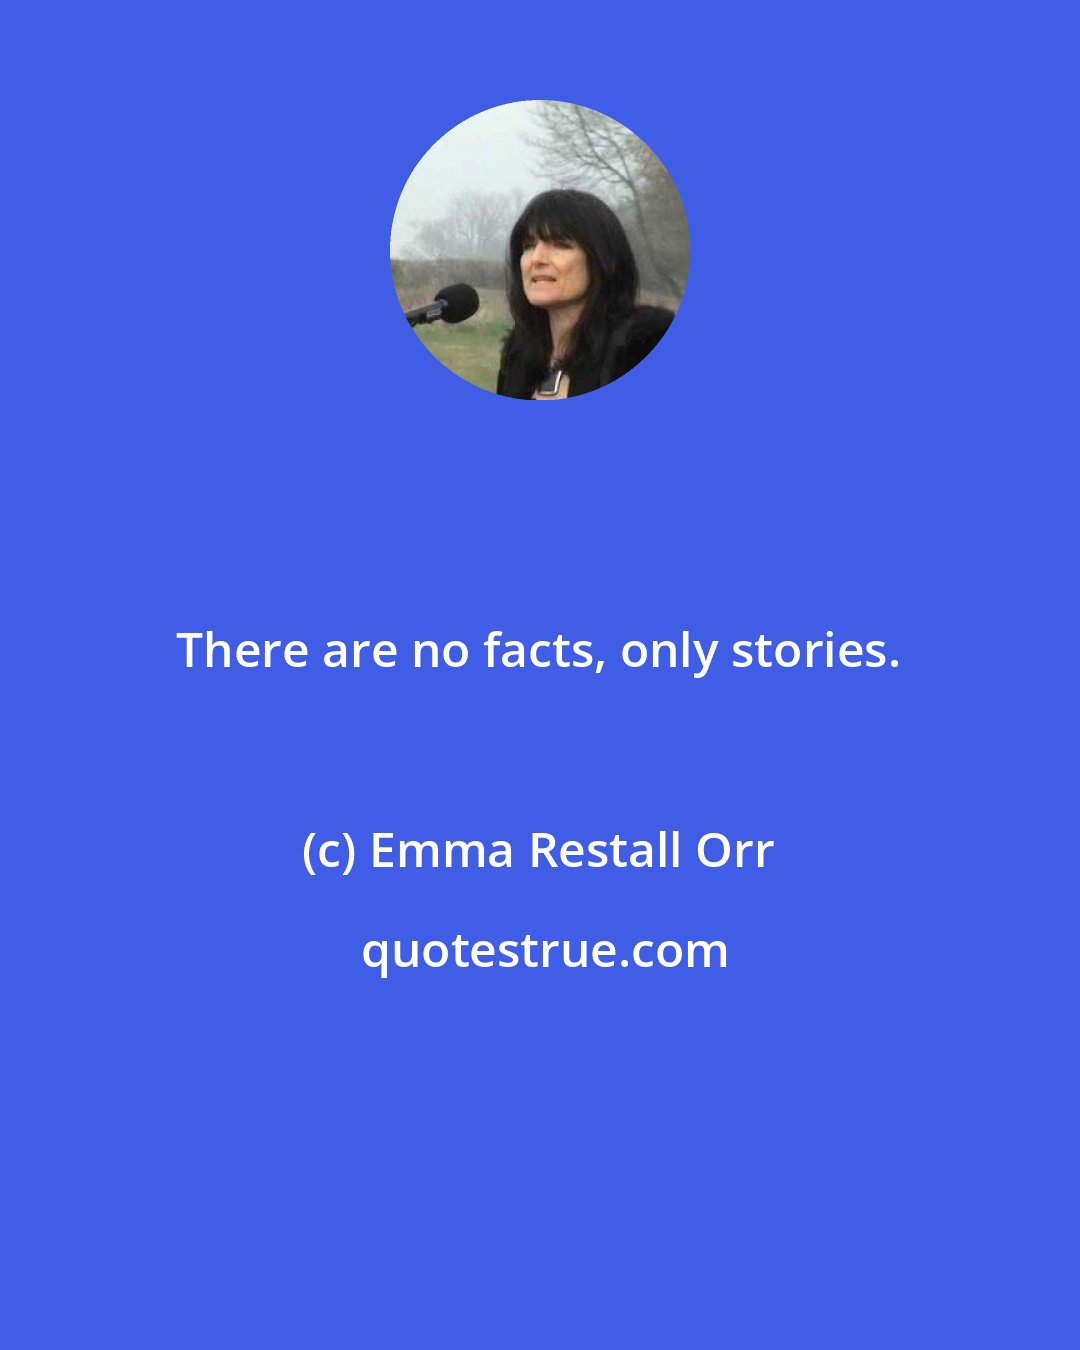 Emma Restall Orr: There are no facts, only stories.